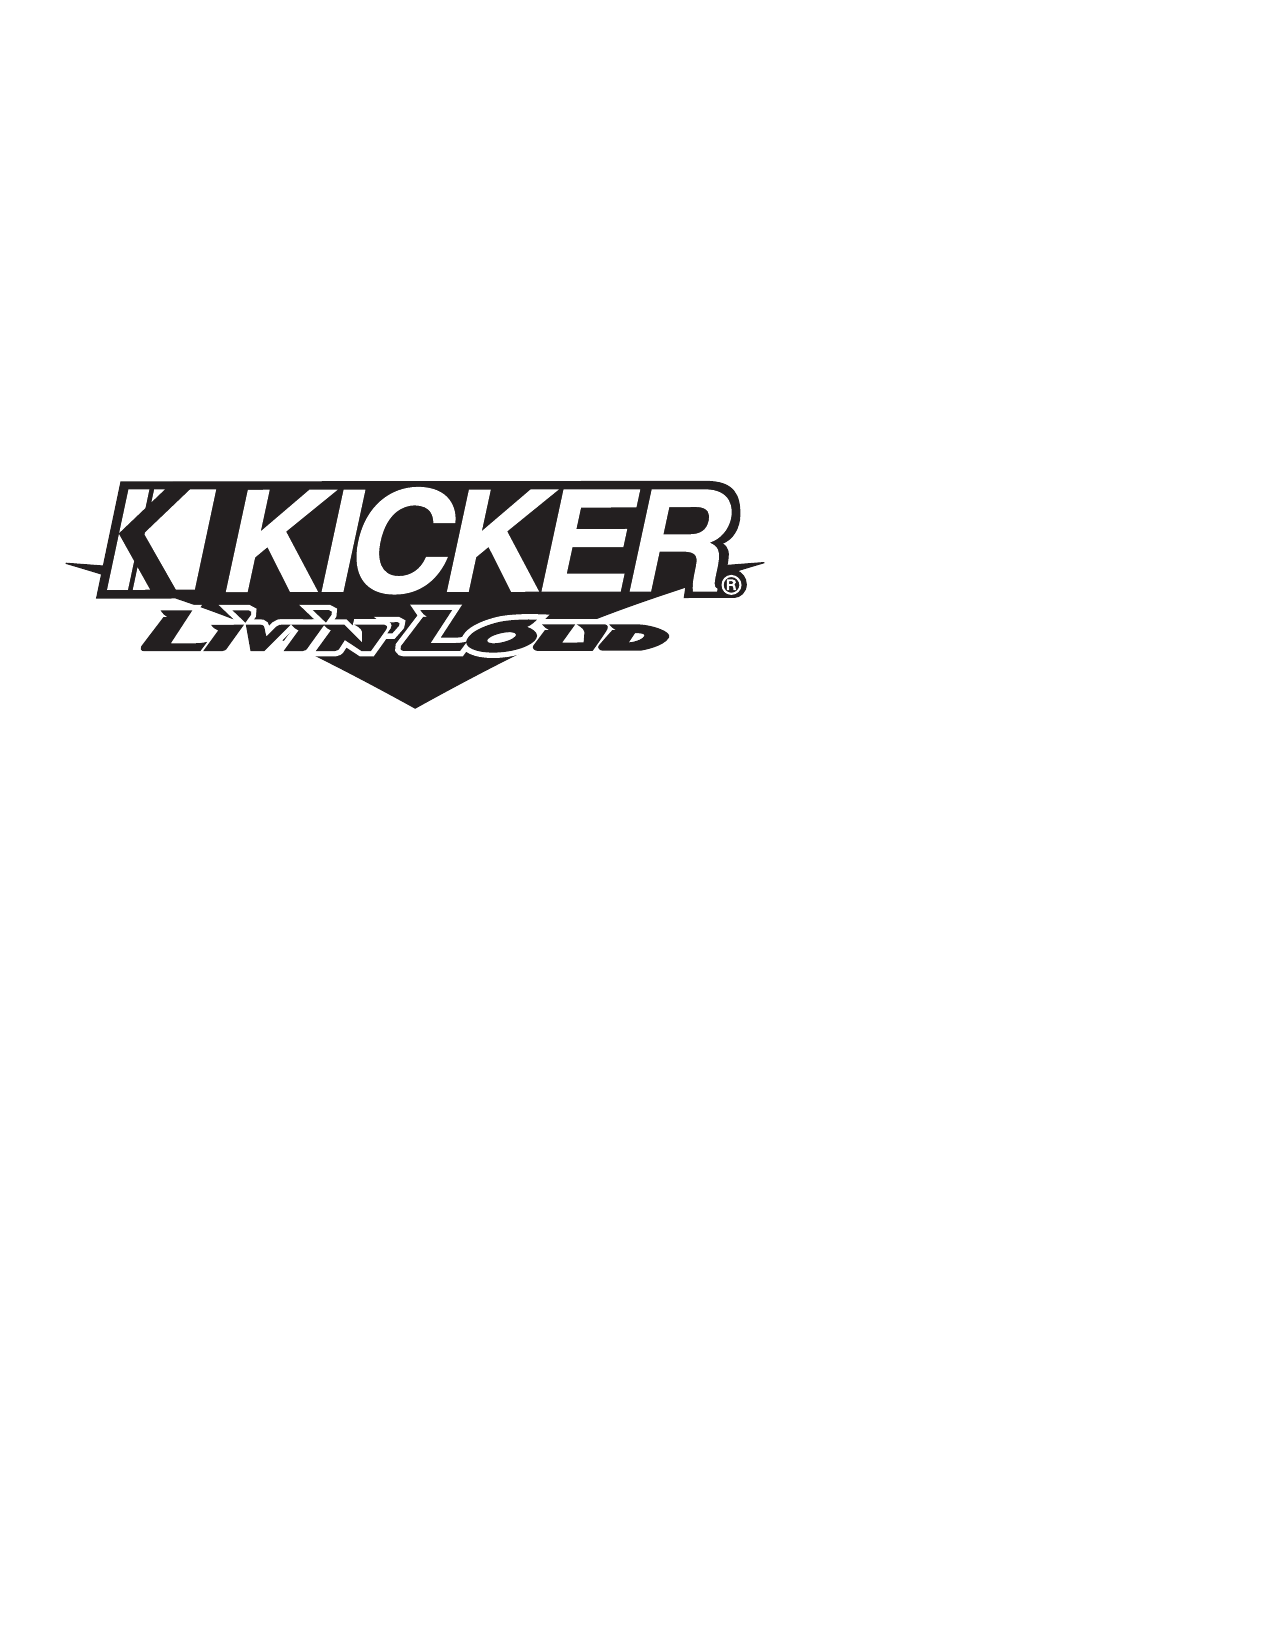 Page 12 of 12 - Kicker Kicker-Kx550-3-And-Kx700-5-Owners-Manual- KX-35 Channel Manual  Kicker-kx550-3-and-kx700-5-owners-manual